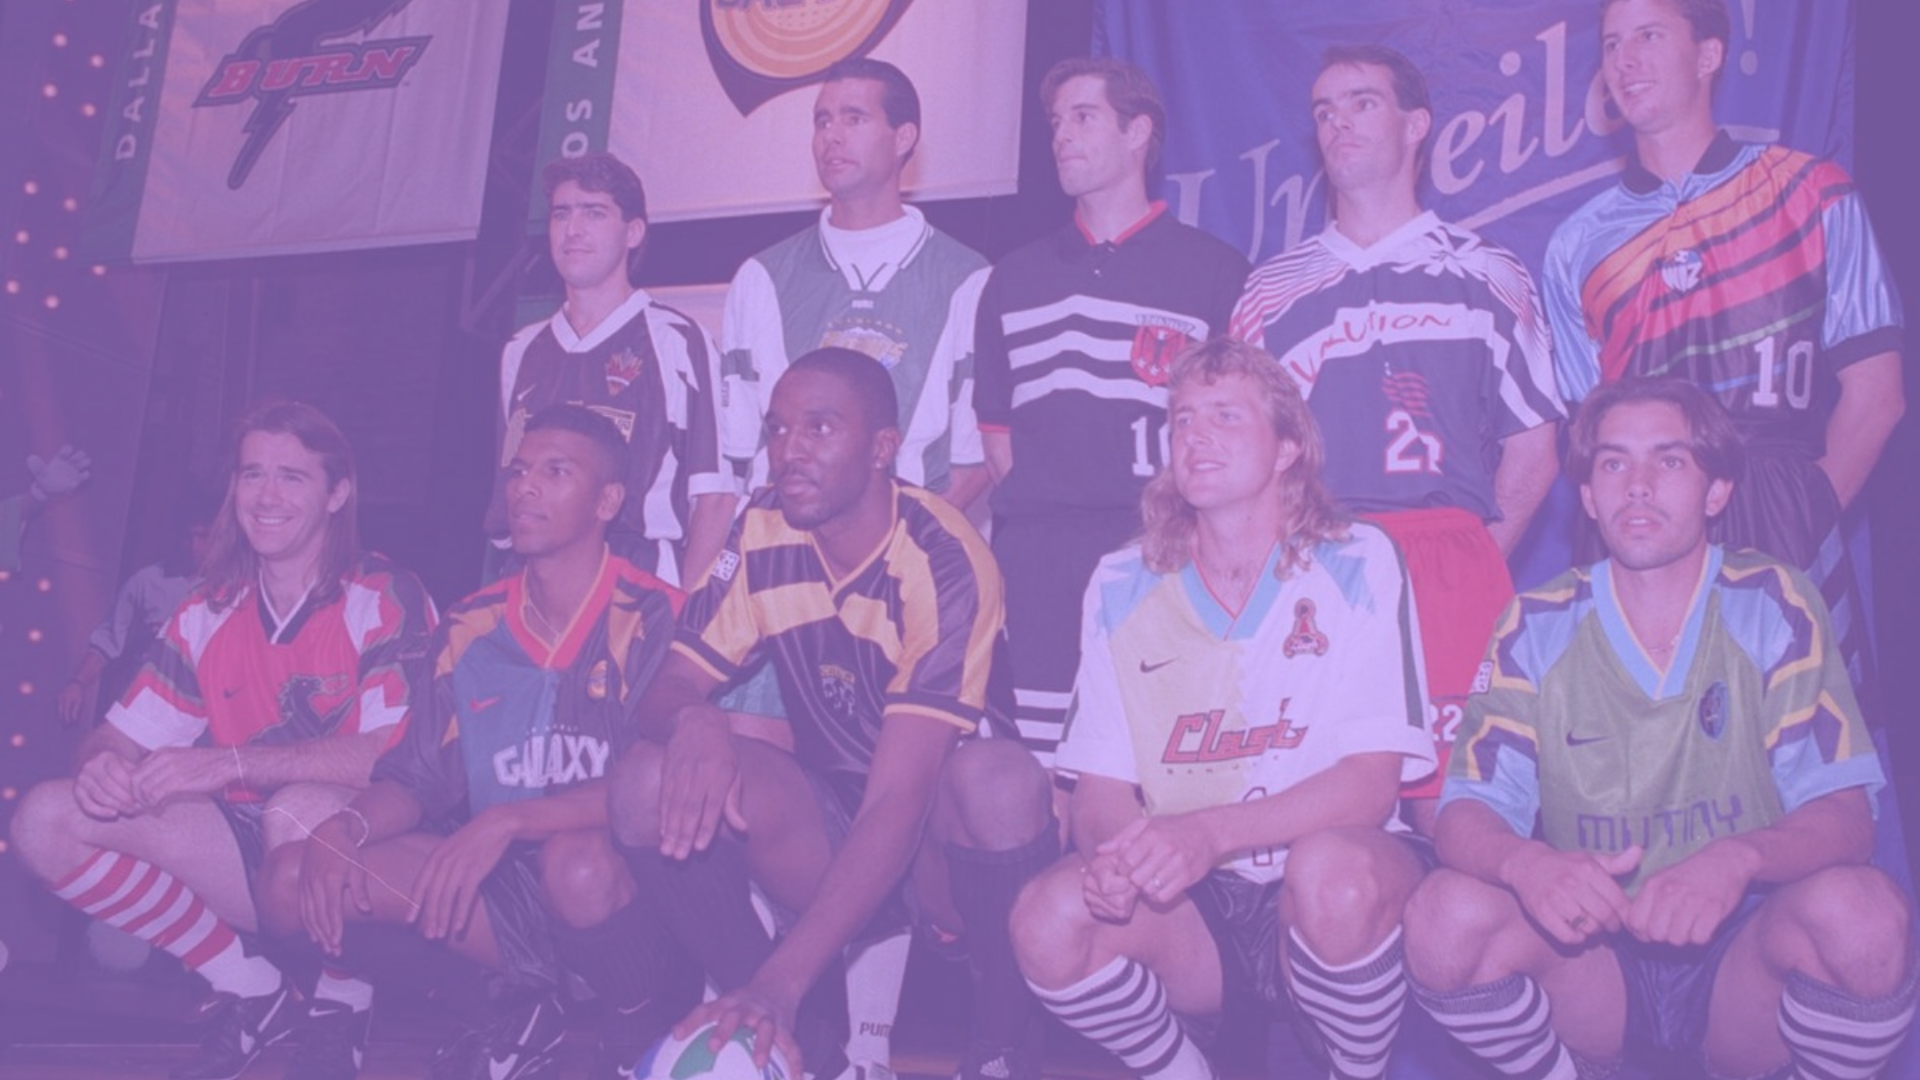 90s MLS kits were truly special and deserve to be celebrated